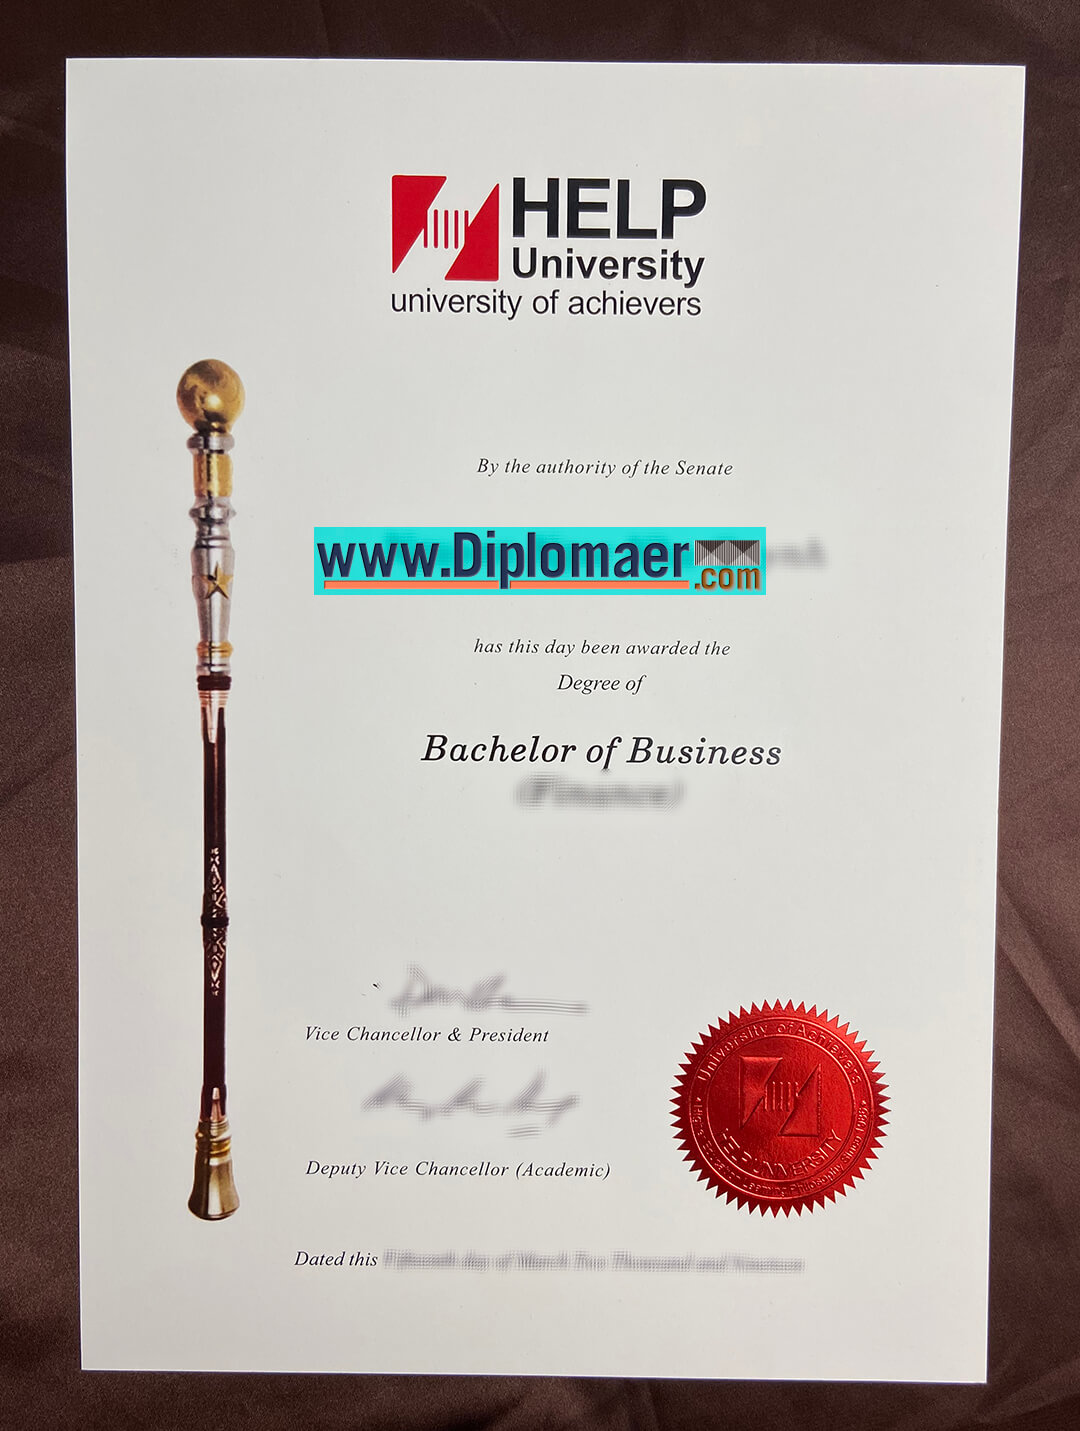 Help University Fake Diploma - How to Buy the Help University Fake Diploma?